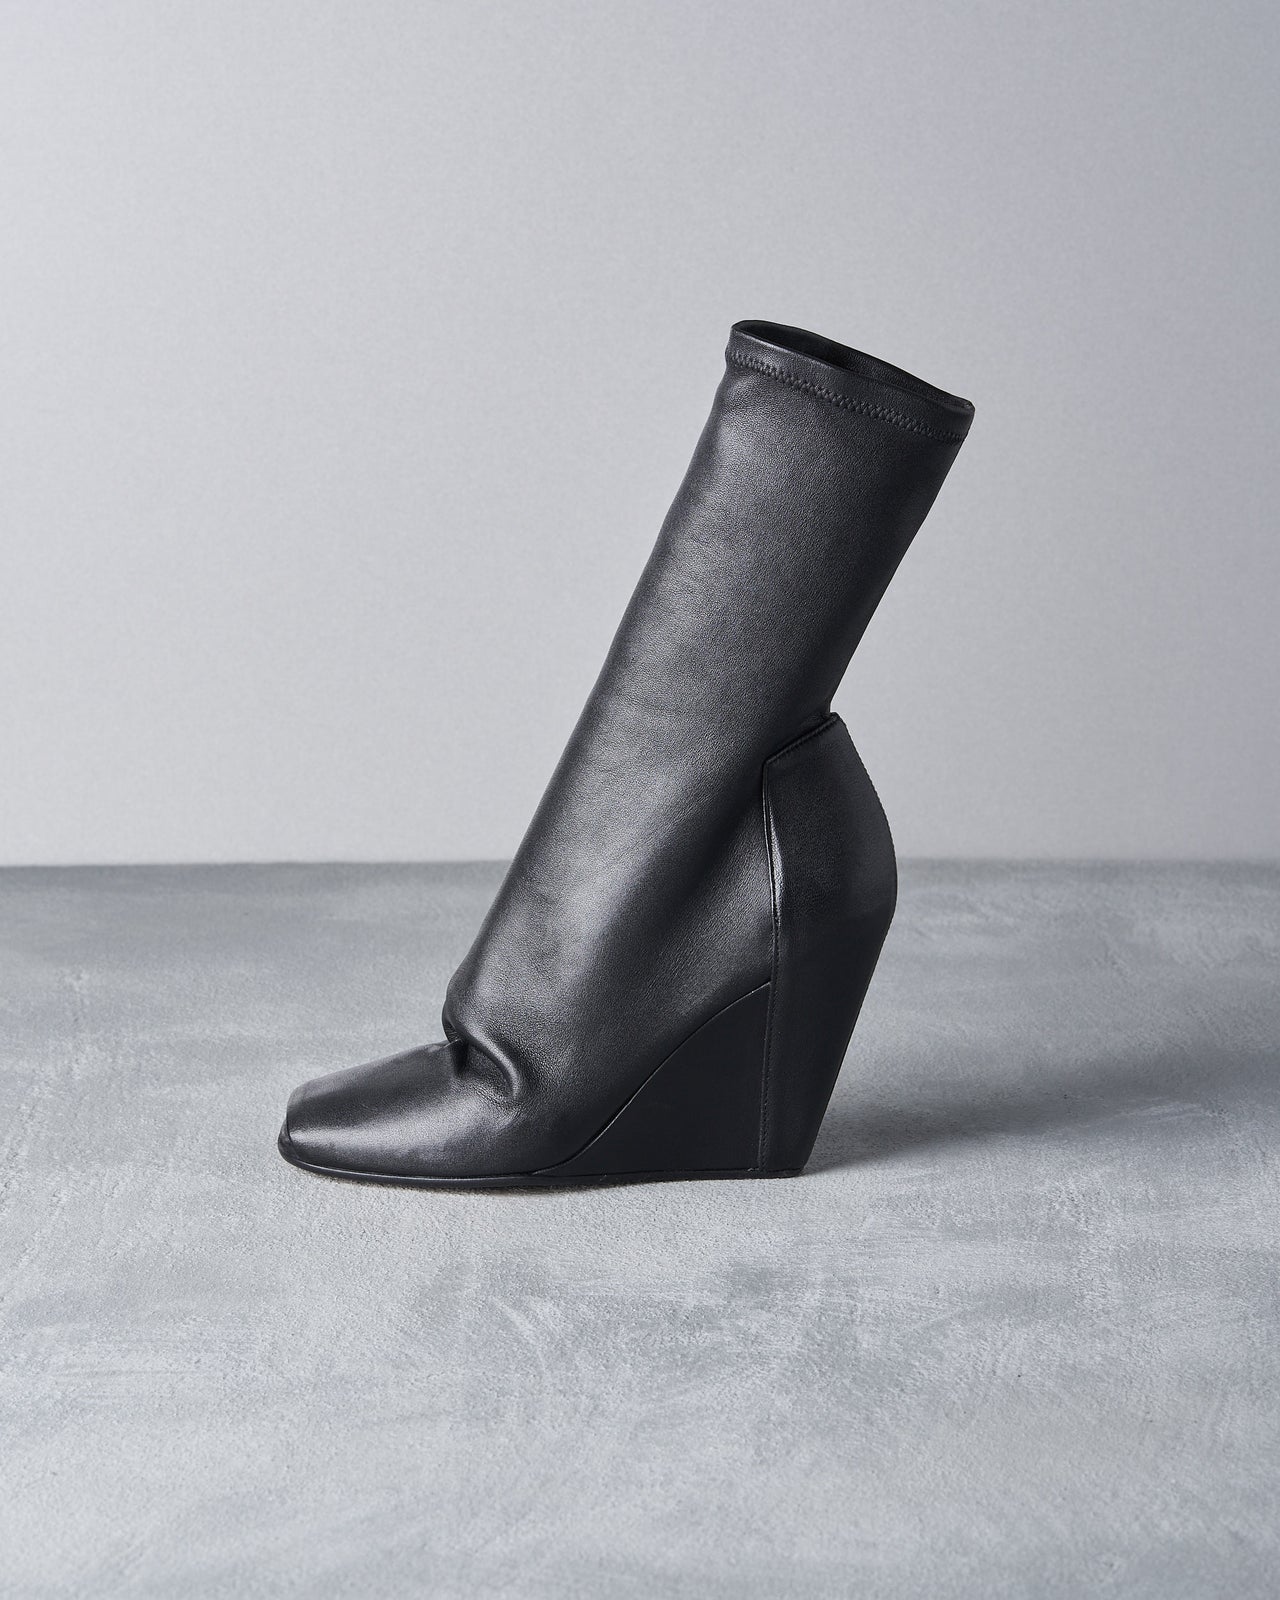 Rick Owens SS 2018 Leather sock wedge